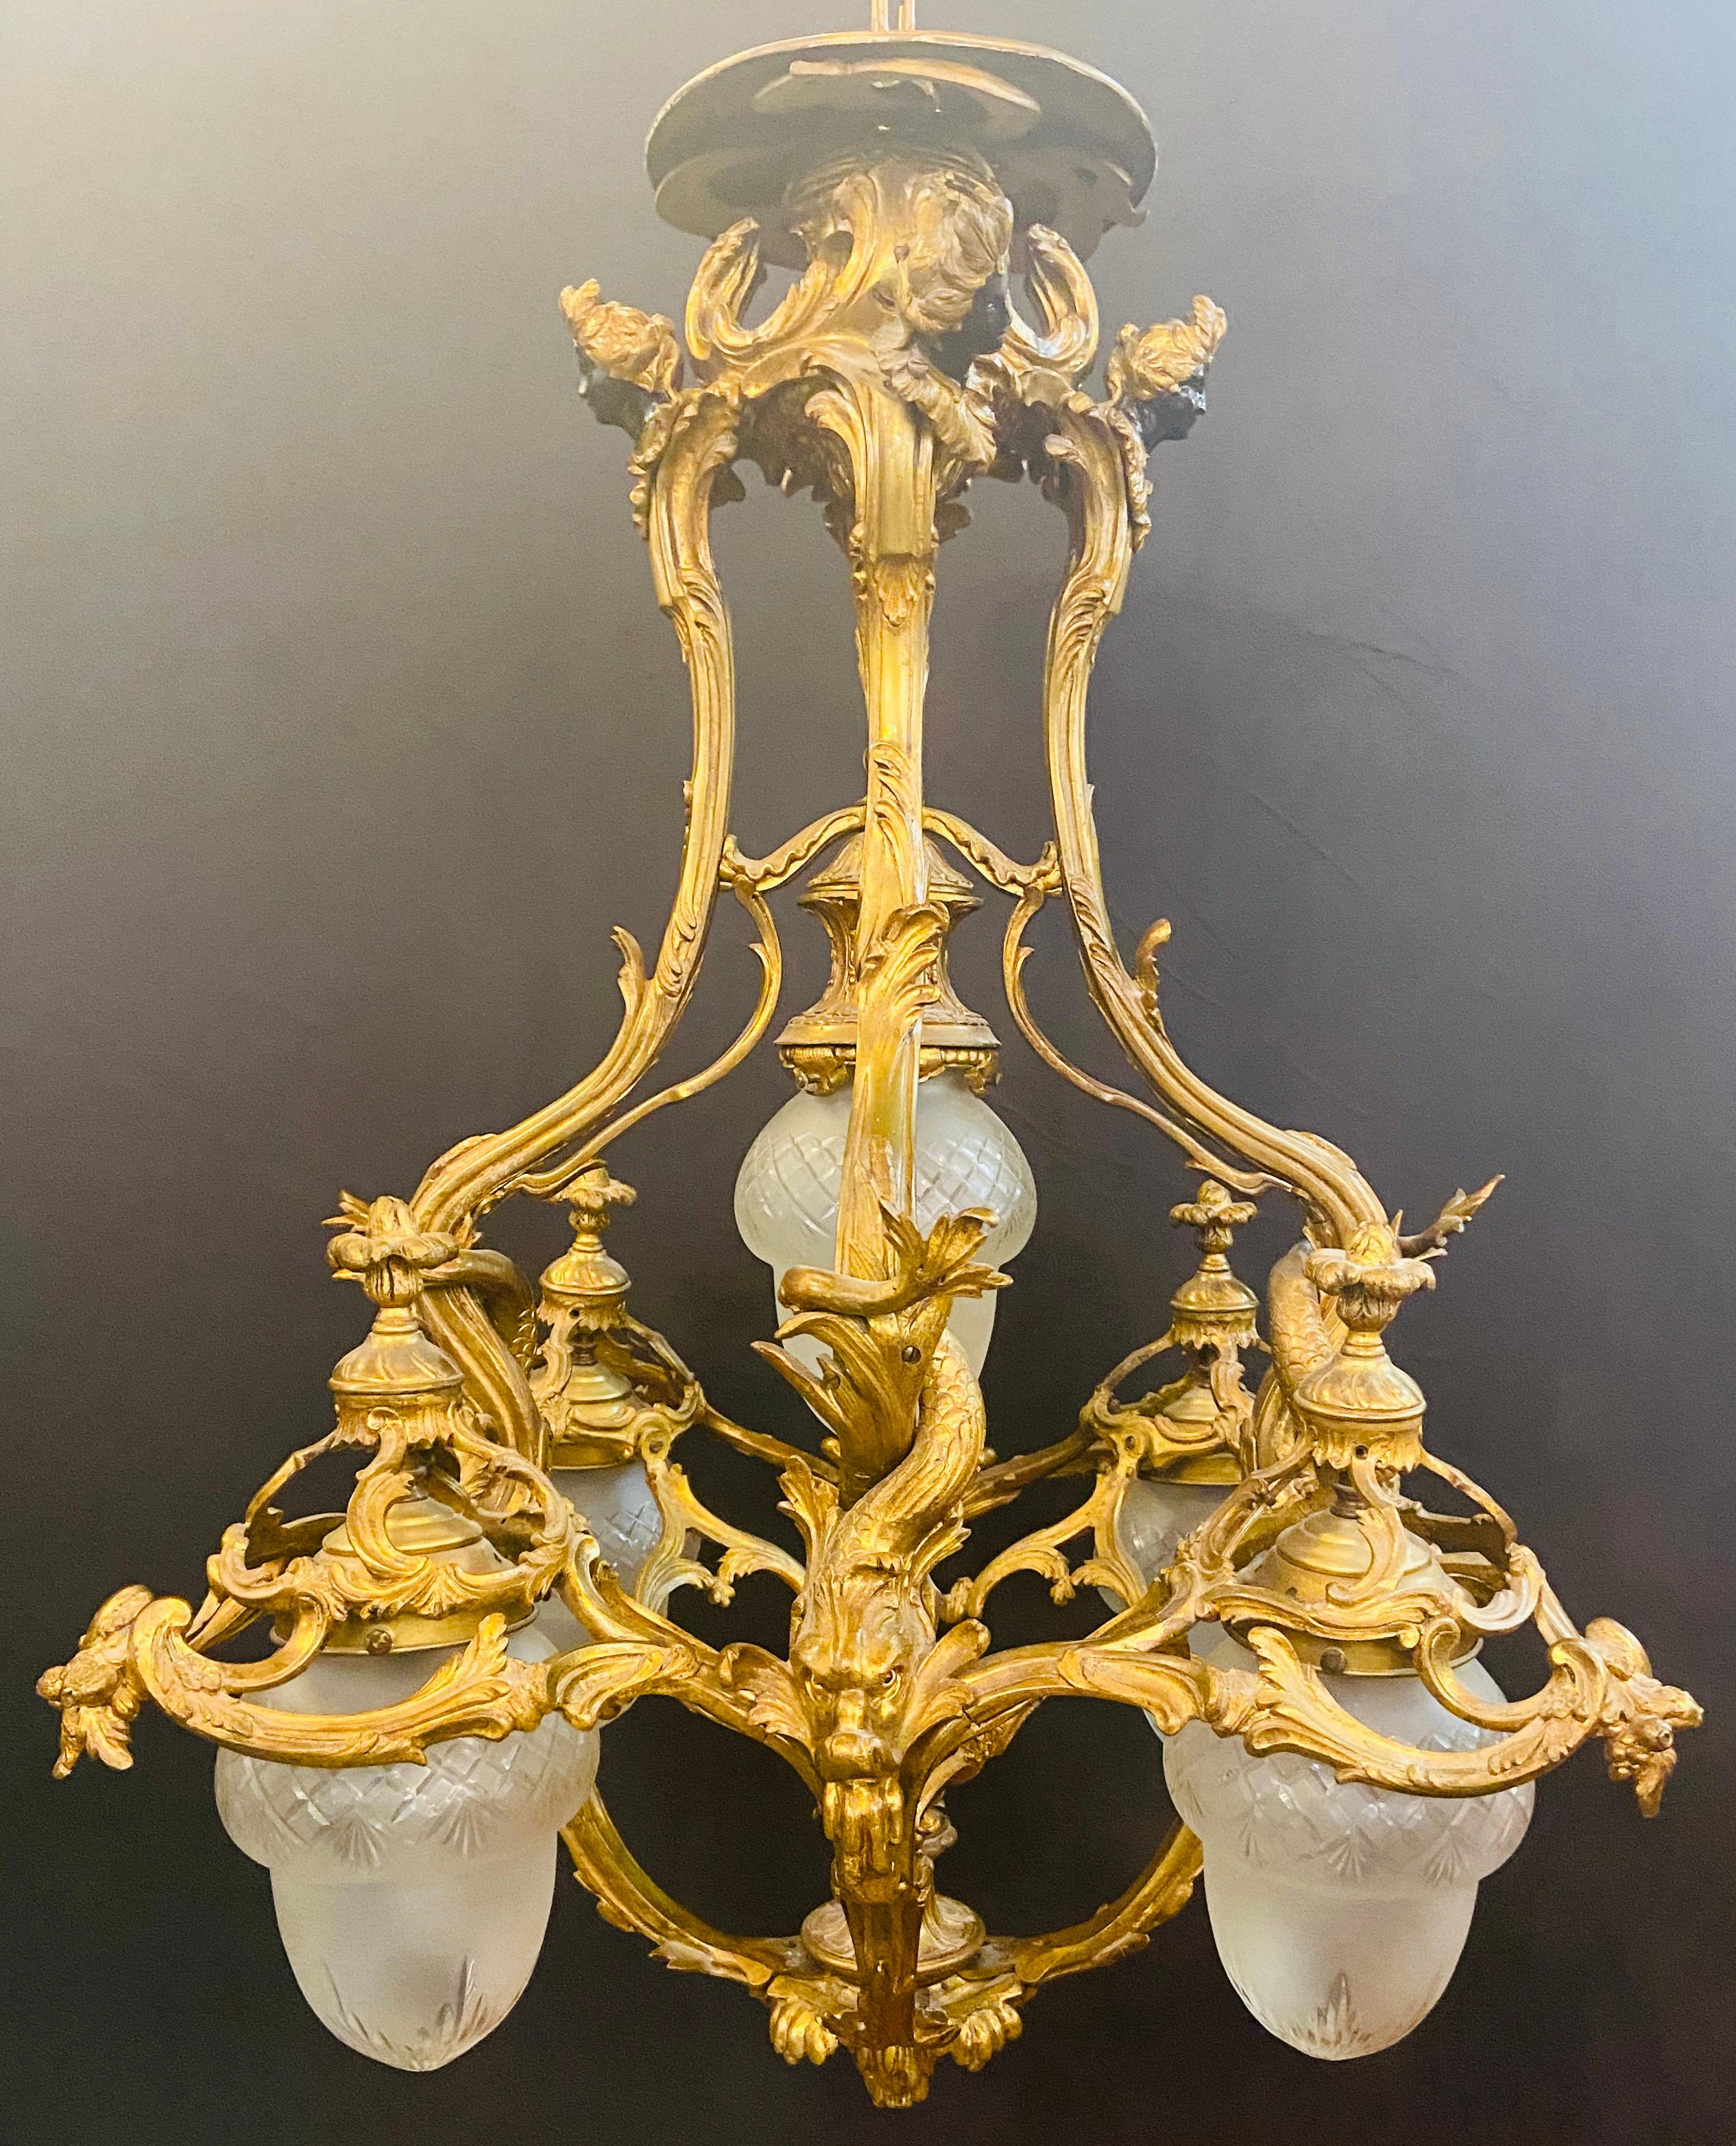 A spectacular 19th century French Louis XVI chandelier having 5-light. Featuring it is original Rene Lalique style white milk shades and a fine bronze carving style, the chandelier collar is decorated with four women heads looking forward and giving